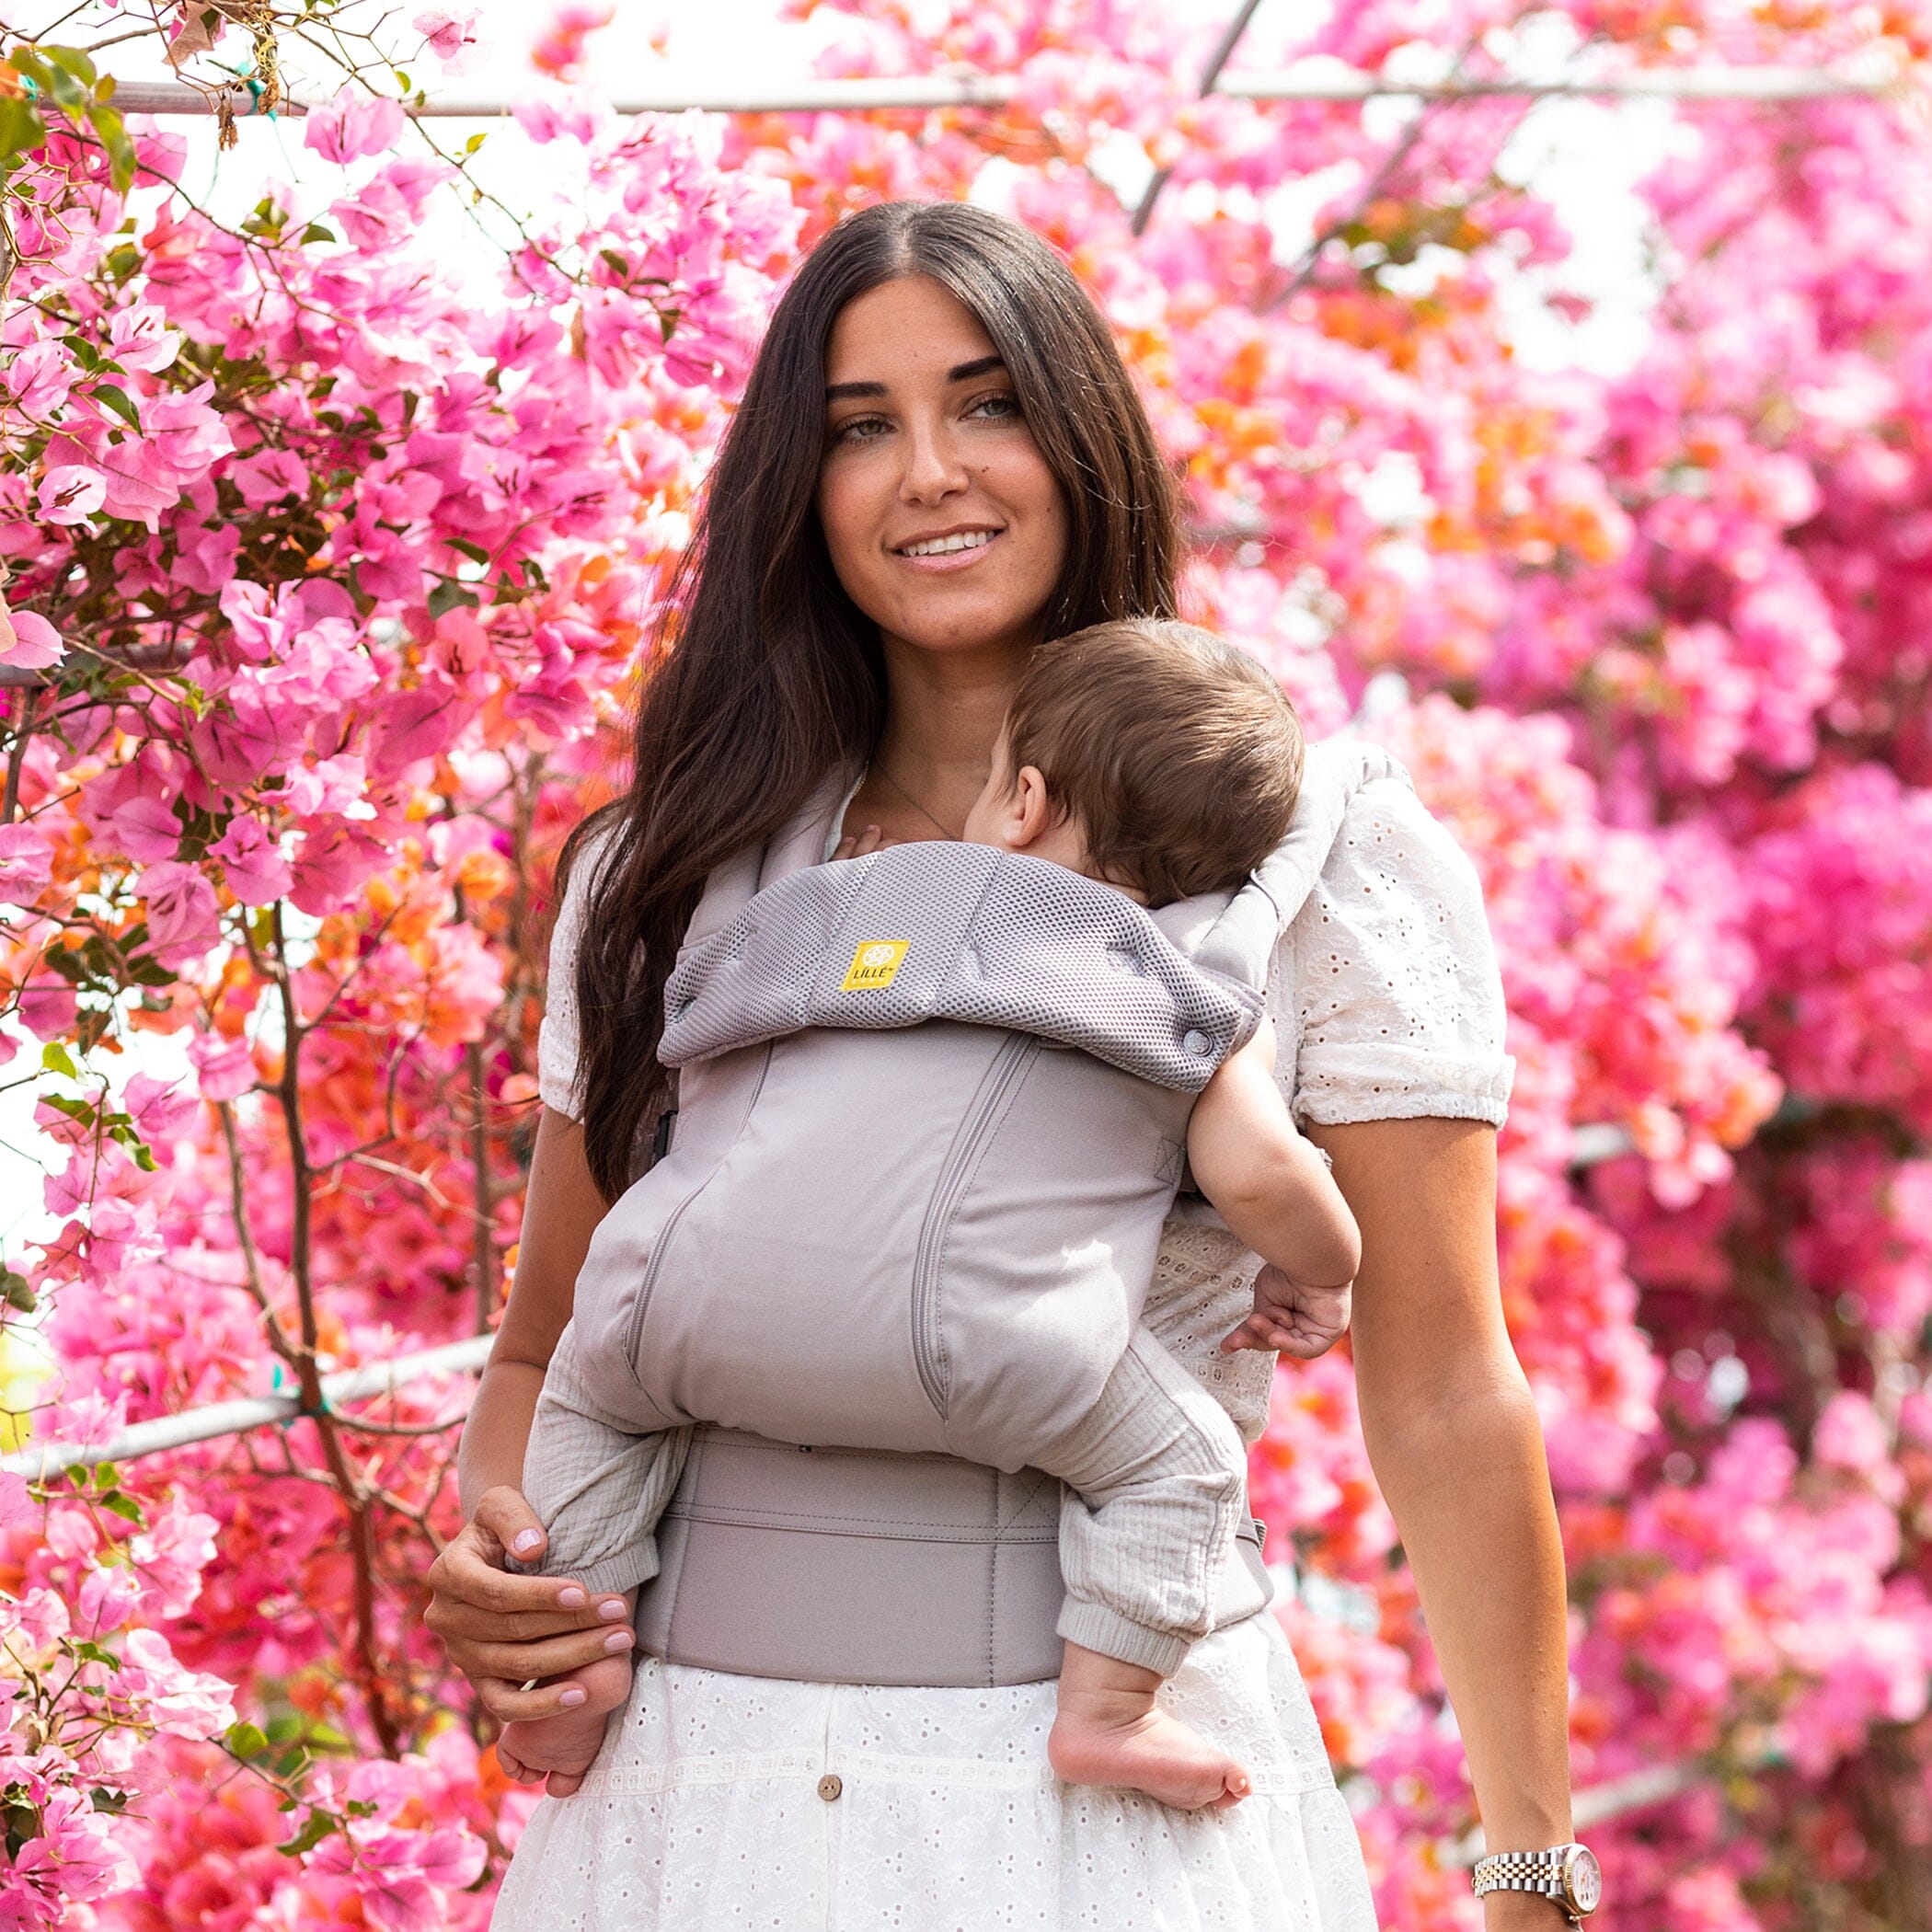 Mom wearing complete all seasons carrier in stone color with 5 month old infant in narrow ergonomic seat